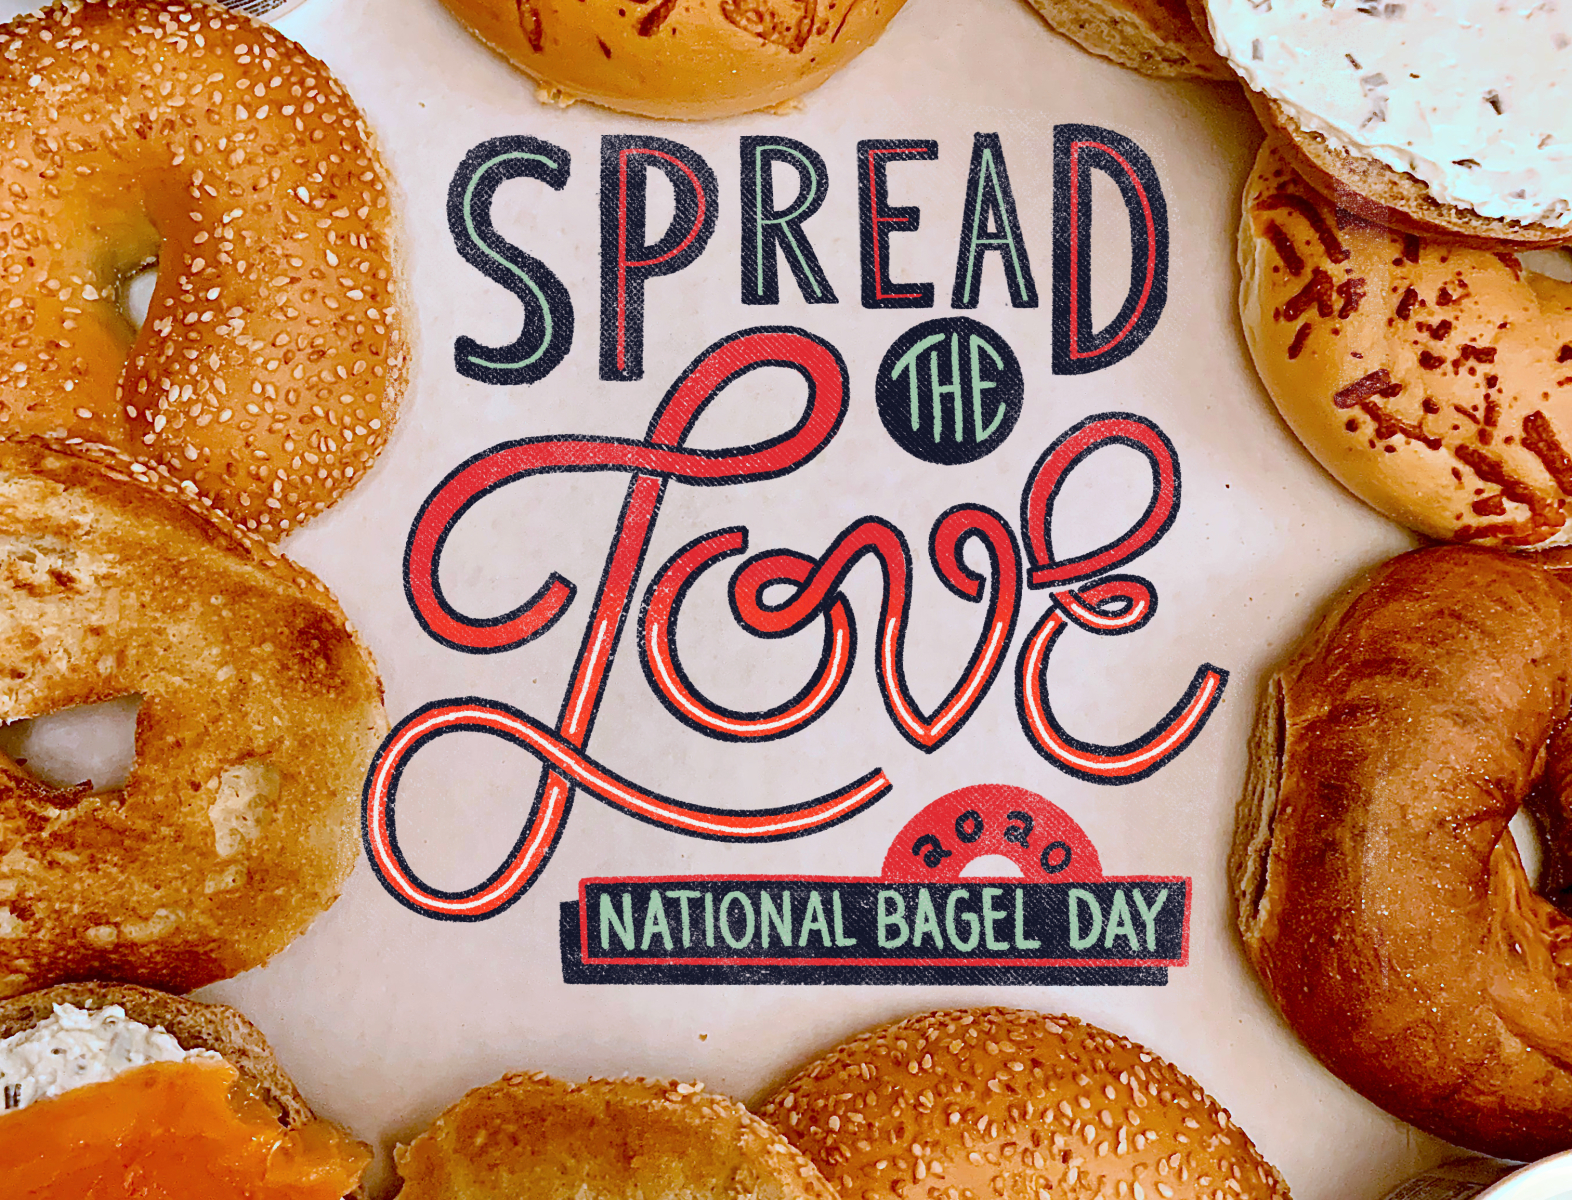 National Bagel Day Type by Matt Bourque on Dribbble